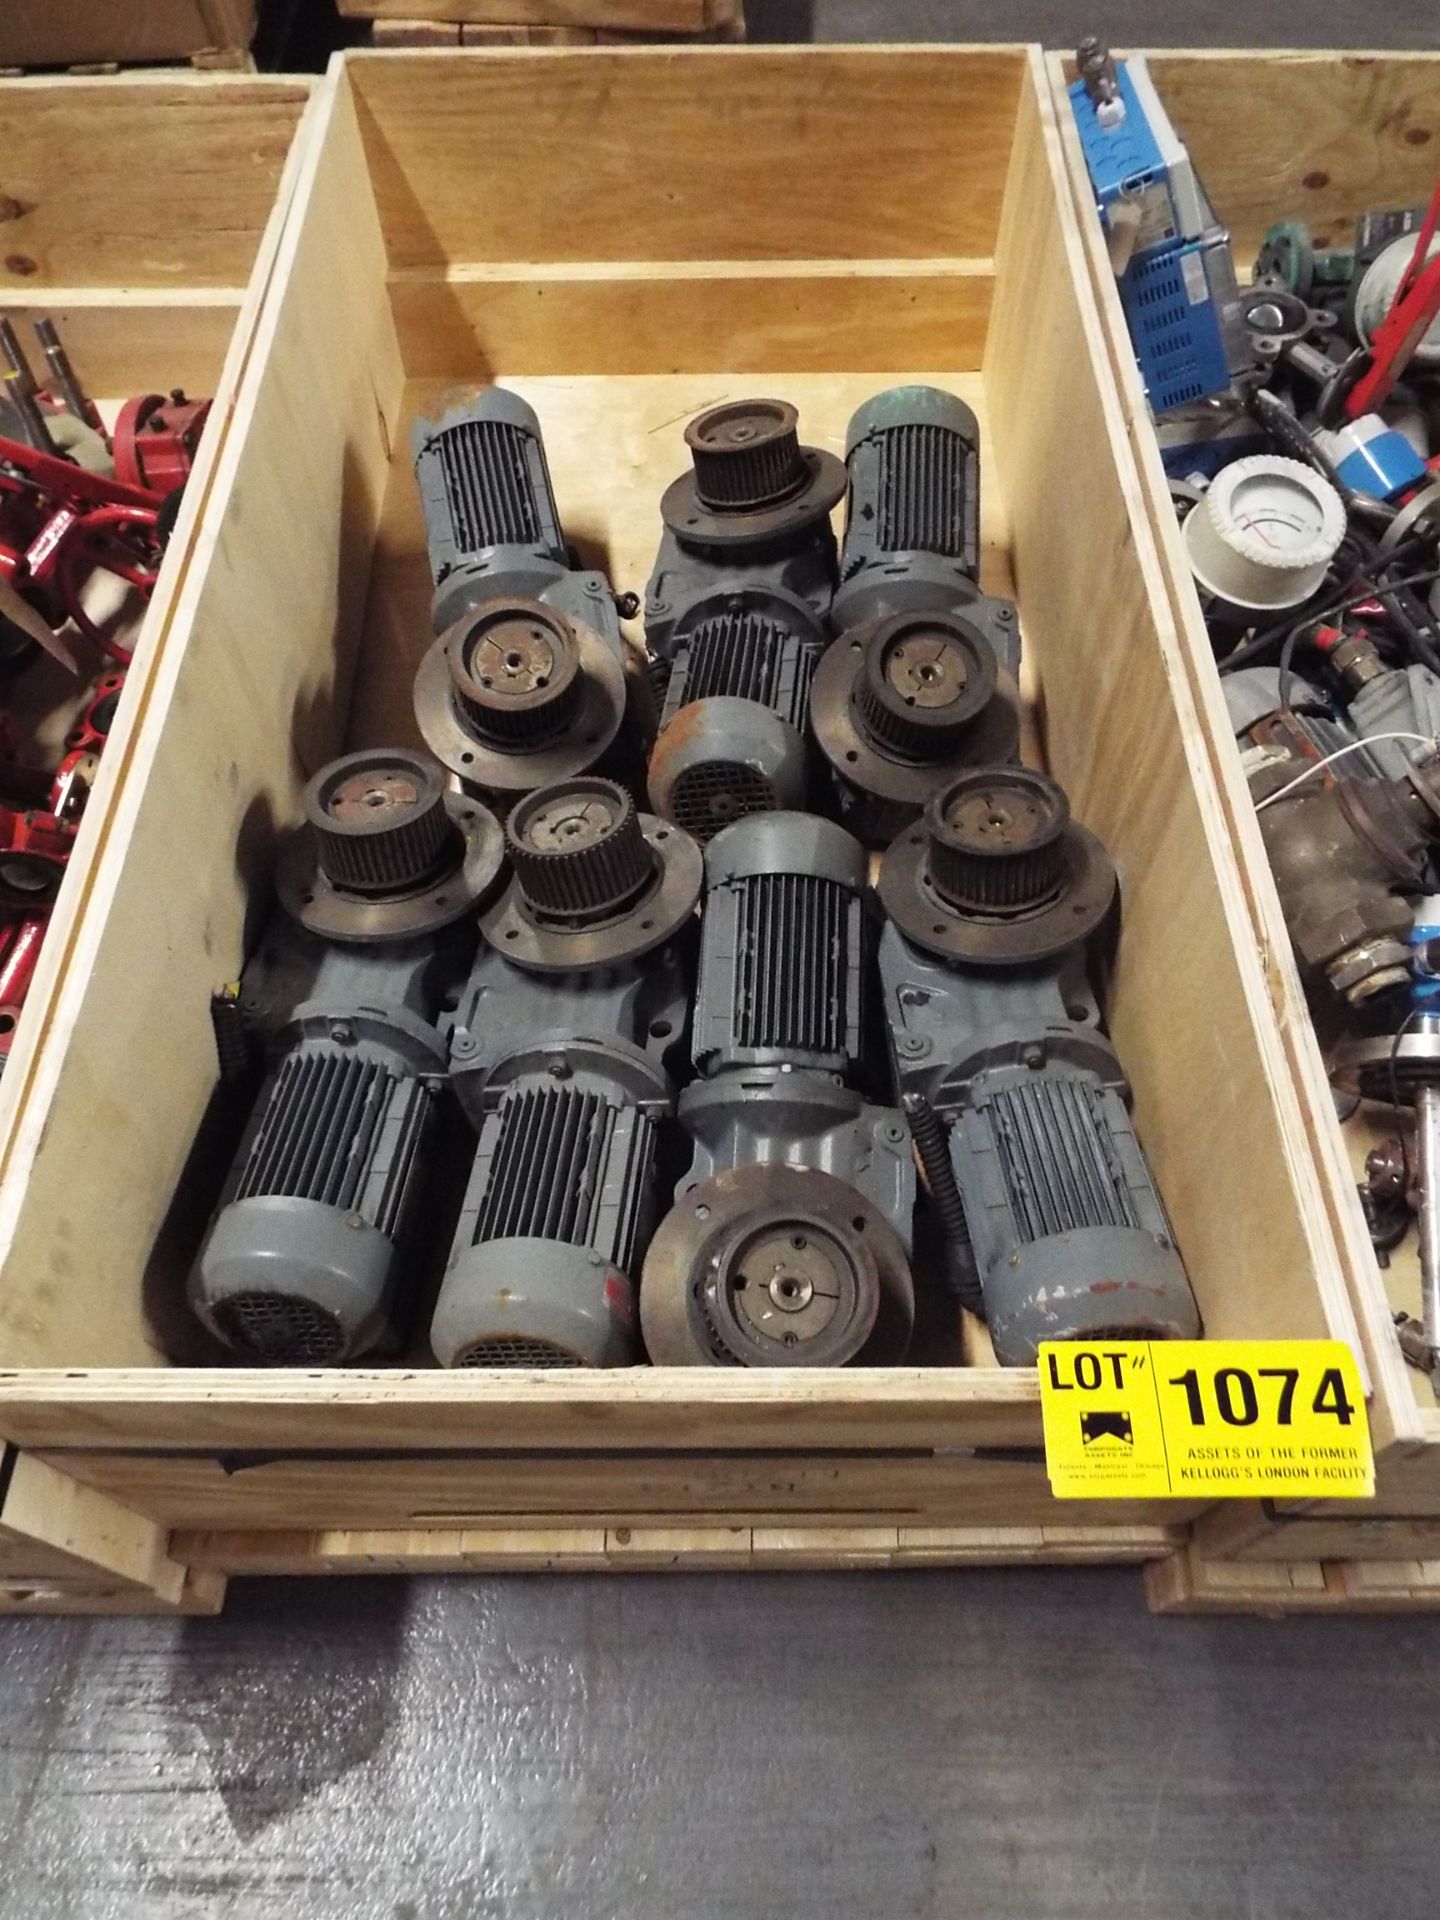 LOT/ CONTENTS OF SKID - (7) GEARBOXES WITH MOTORS